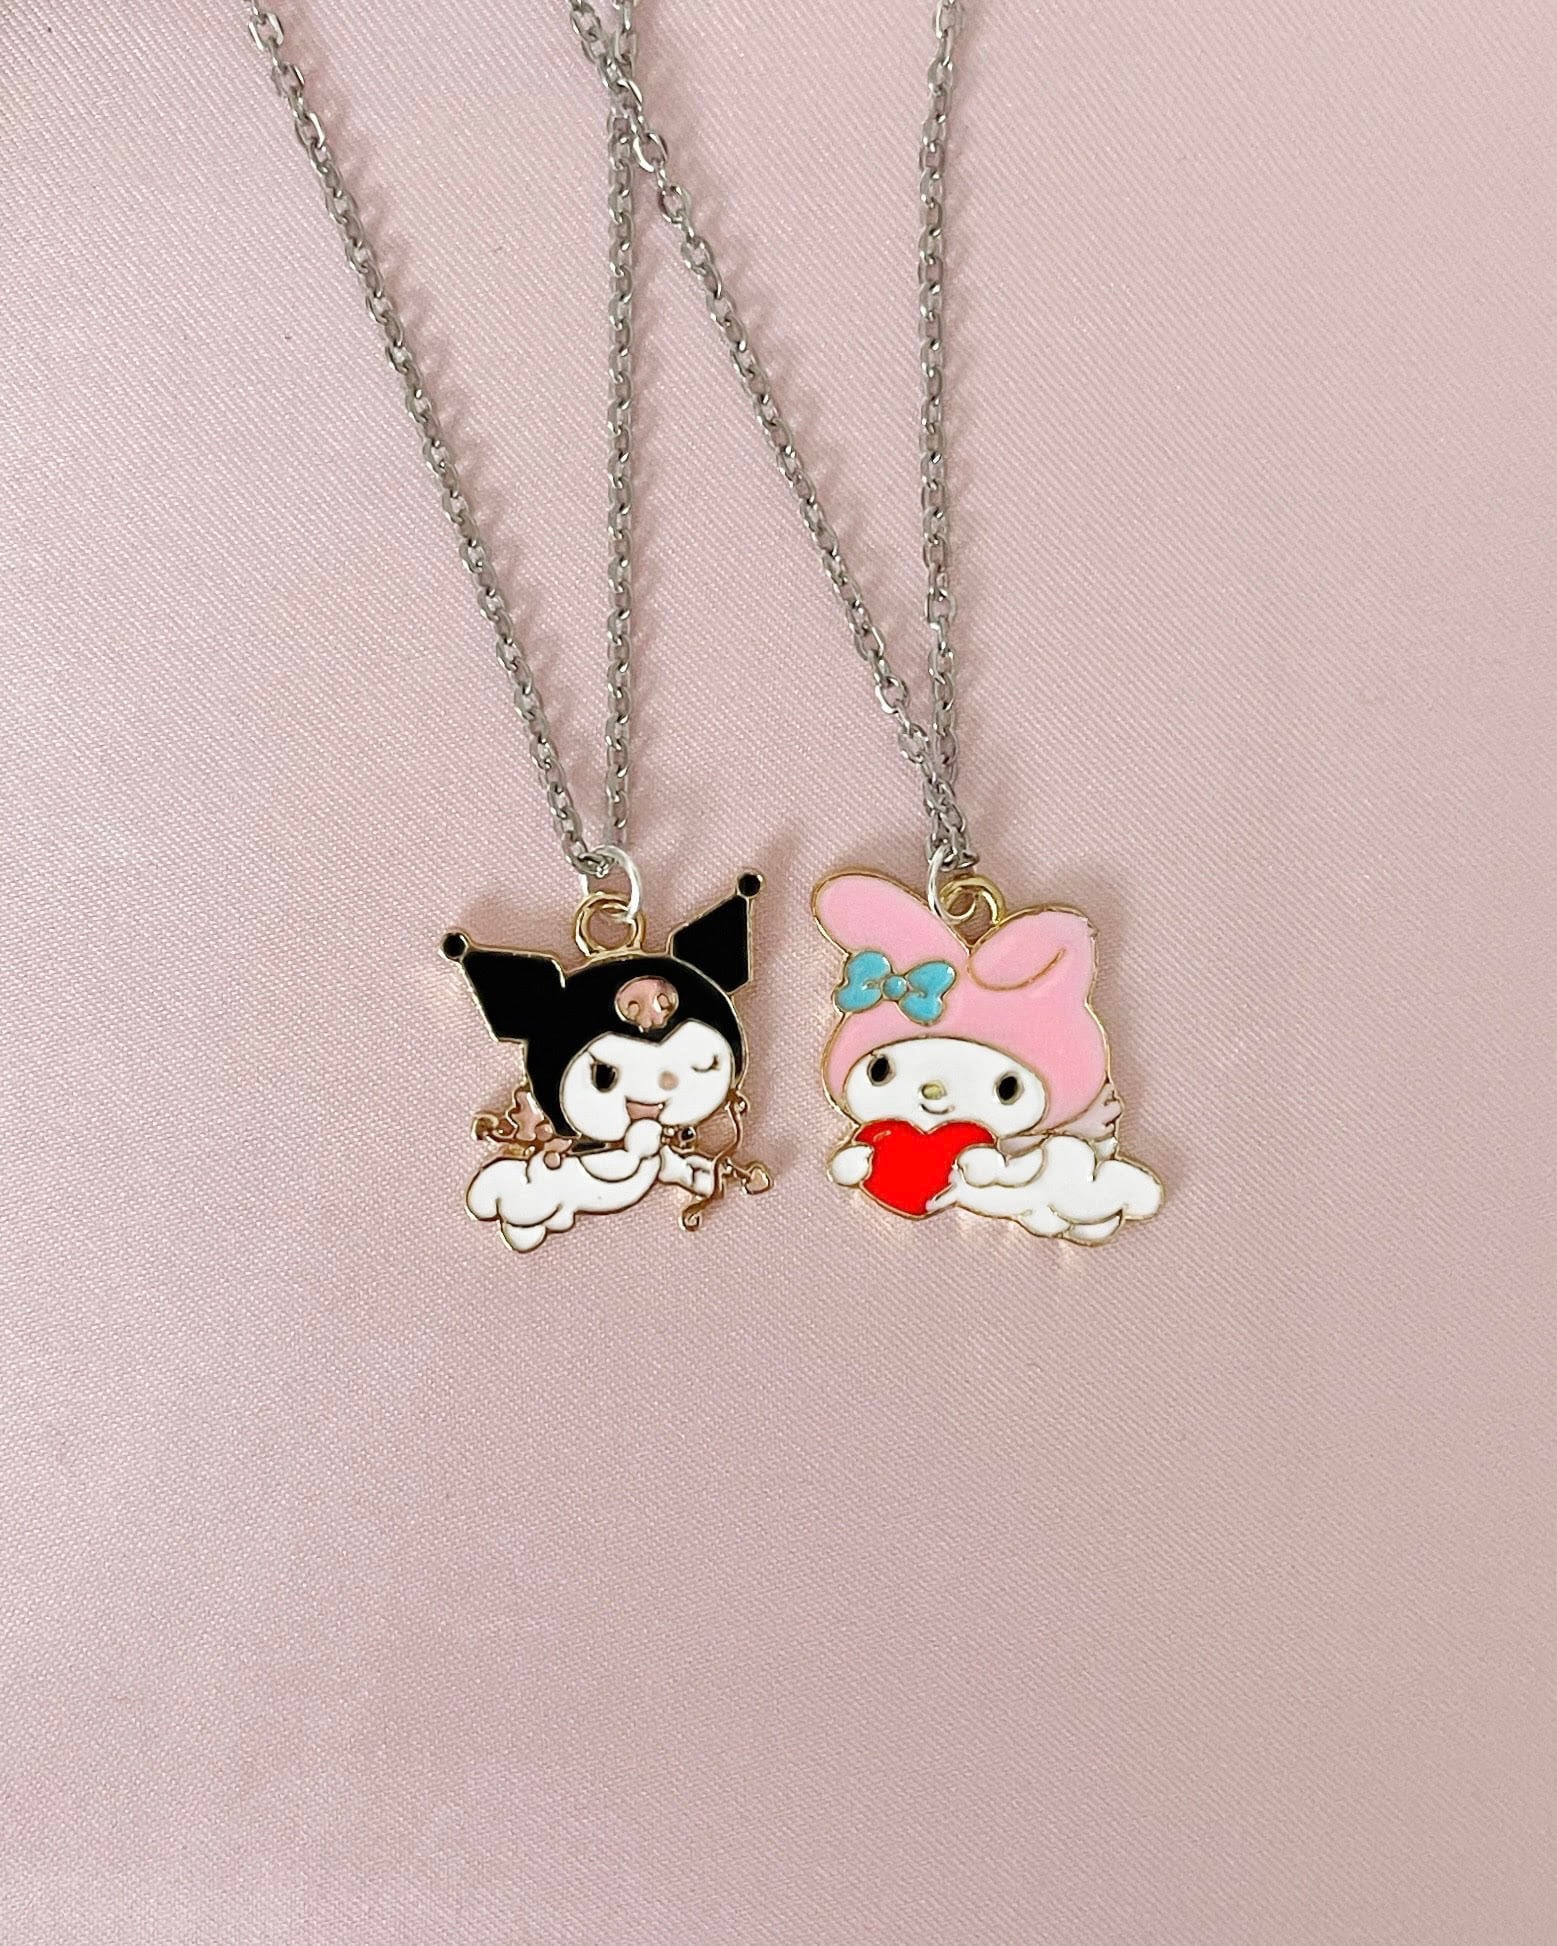 Matching Sanrio Necklaces Set, My Melody and Kuromi, Kawaii Cute Unique ...